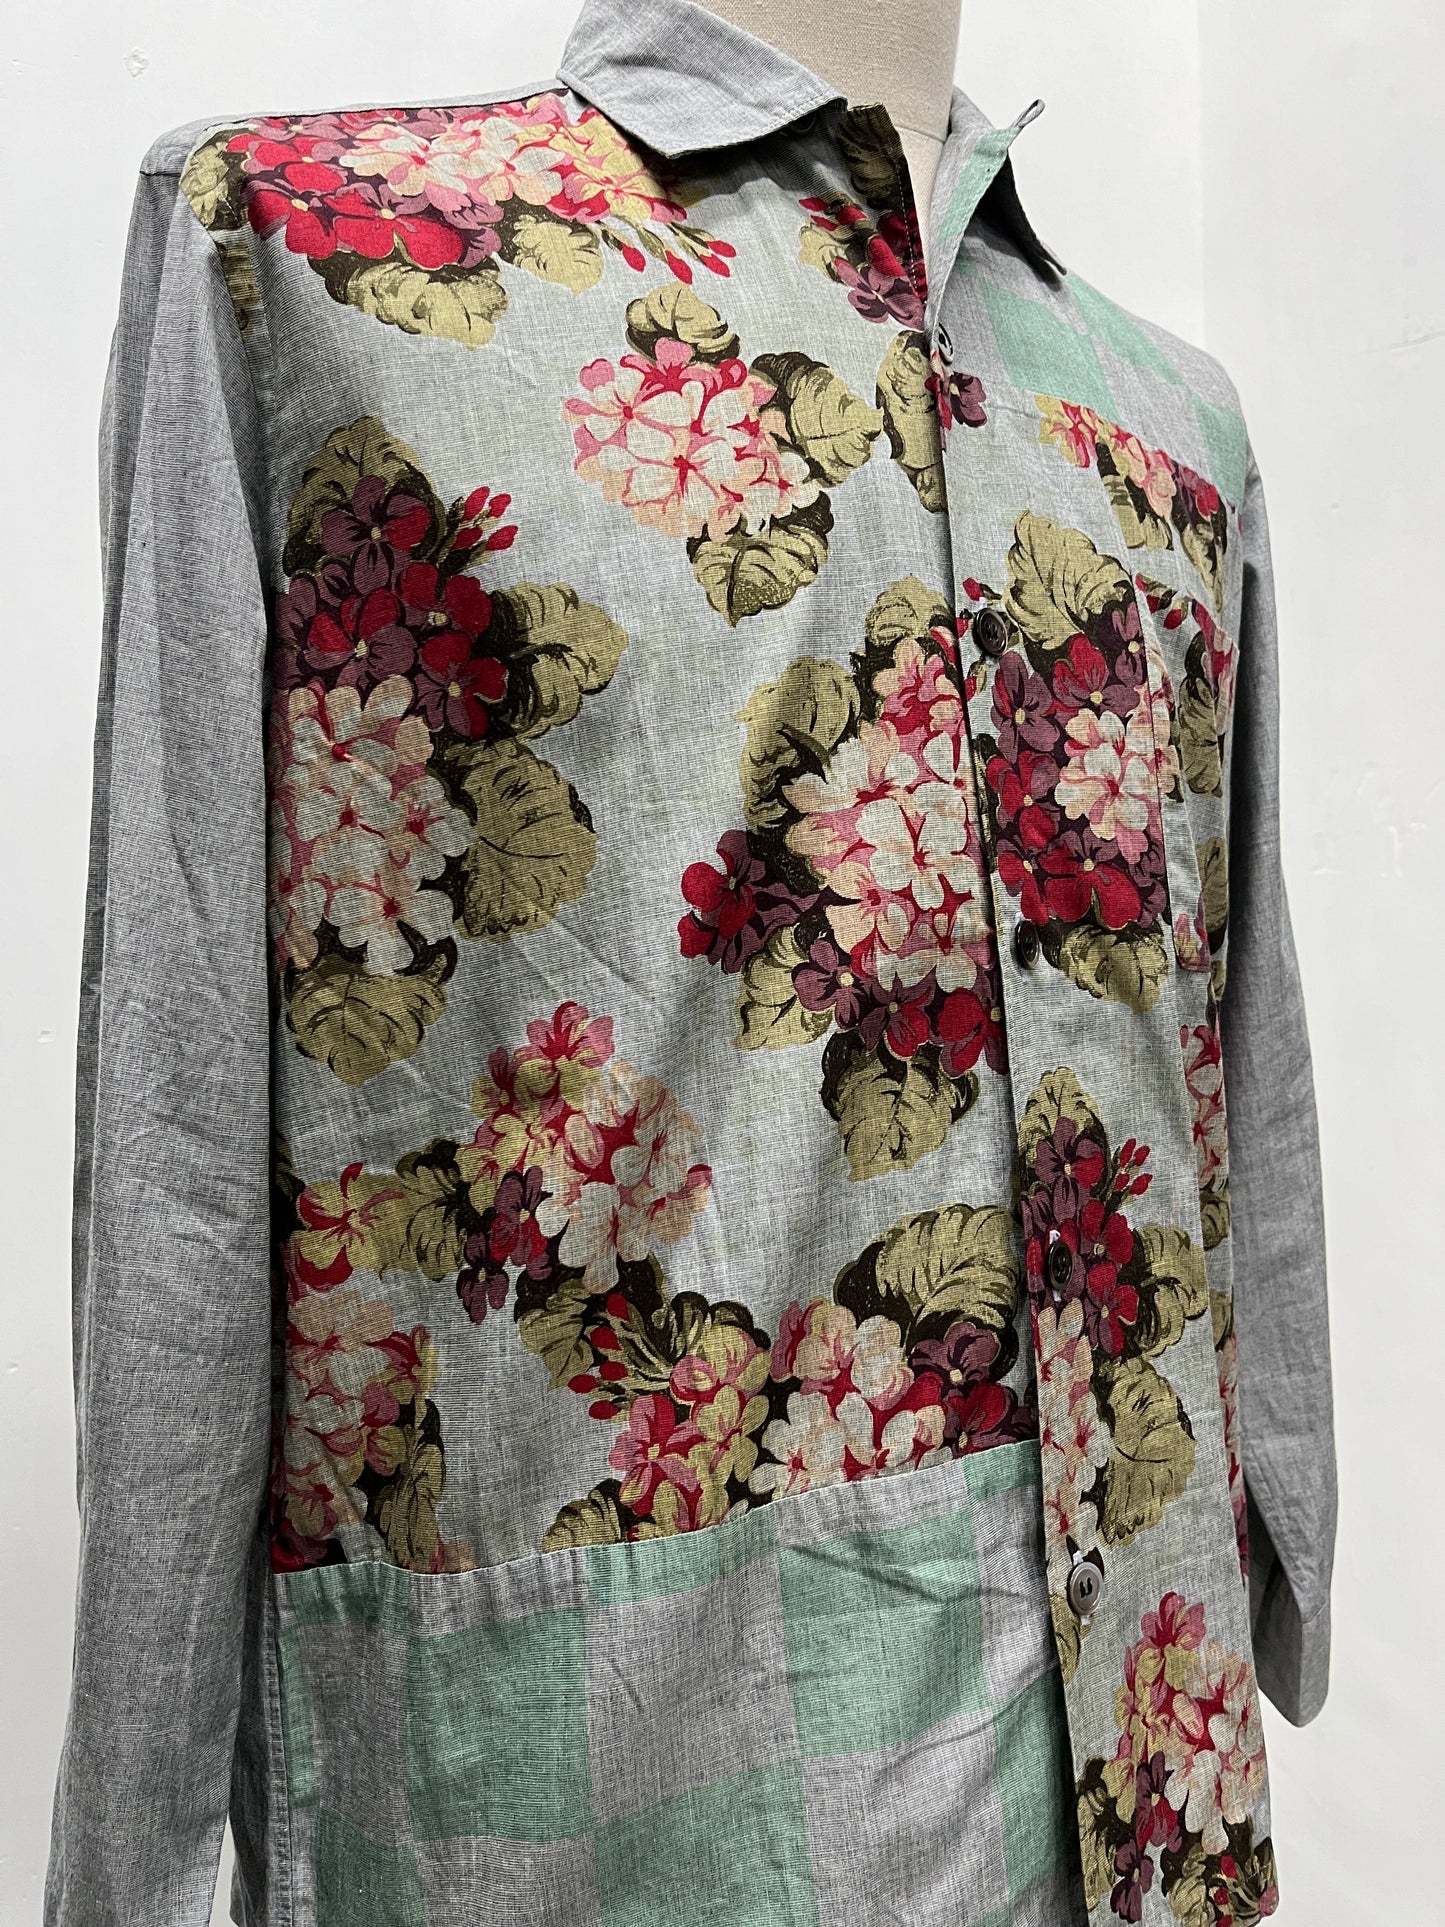 Comme des garcons Homme SS2002 Flower Printed Shirt- Free size